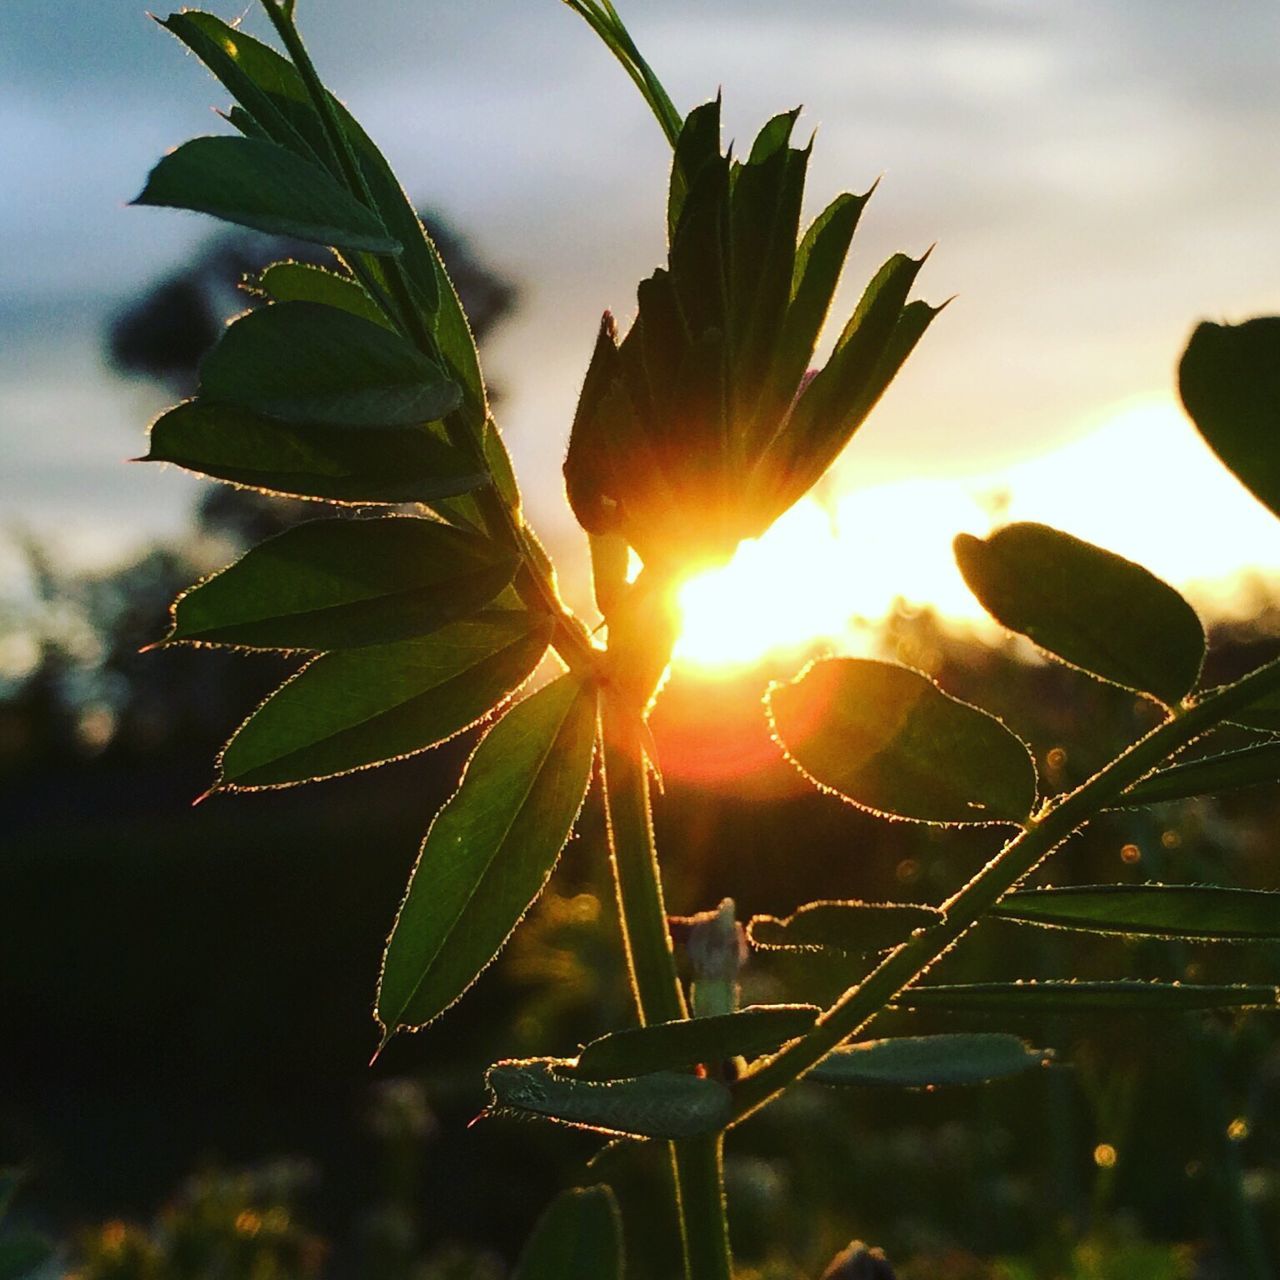 focus on foreground, close-up, growth, fragility, plant, nature, beauty in nature, leaf, sun, sky, freshness, sunset, sunlight, tranquility, dew, outdoors, stem, selective focus, no people, drop